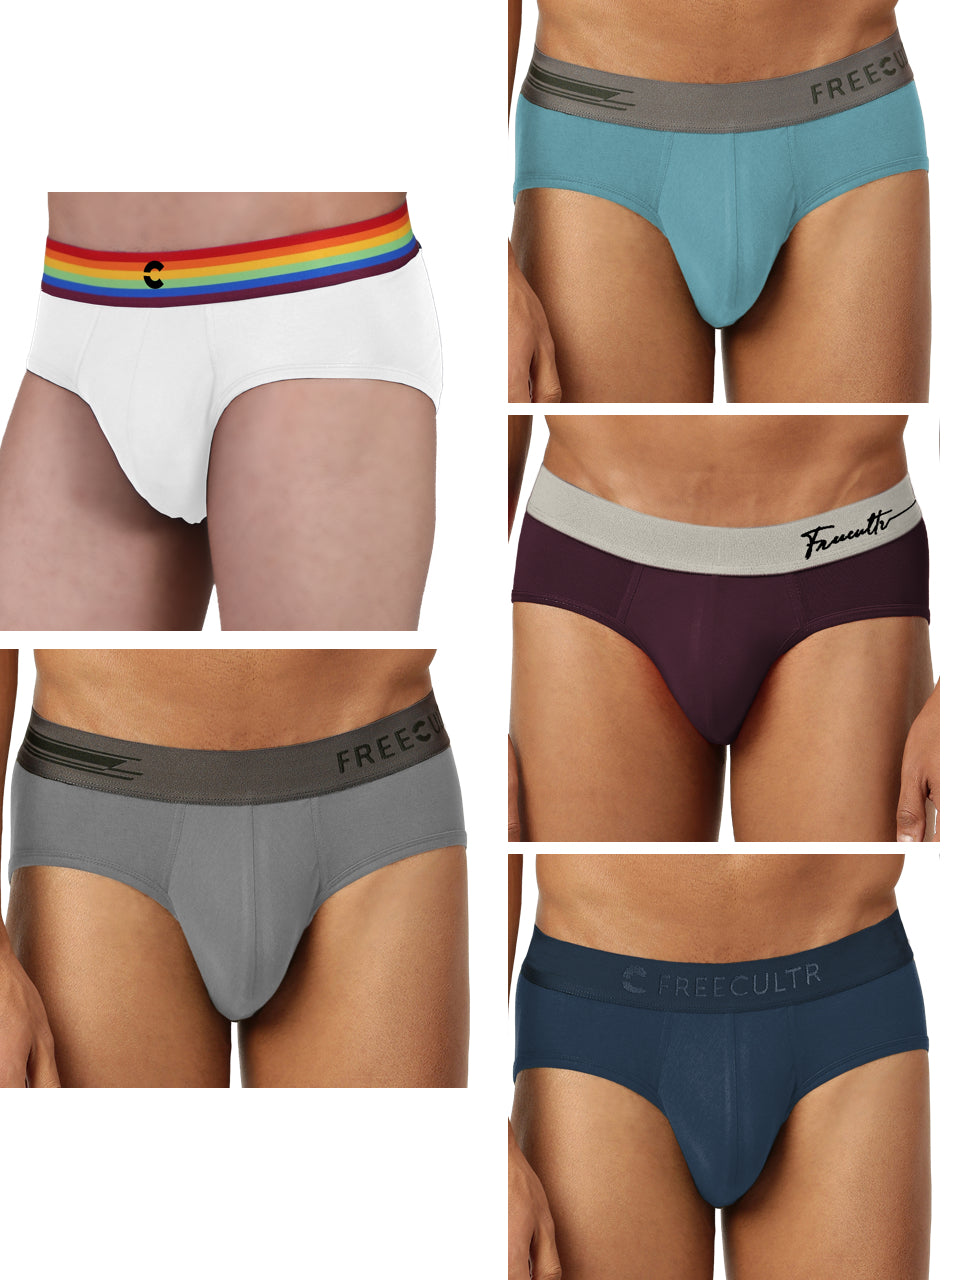 Anti-Bacterial Micro Modal Briefs With Pride (Pack of 5)